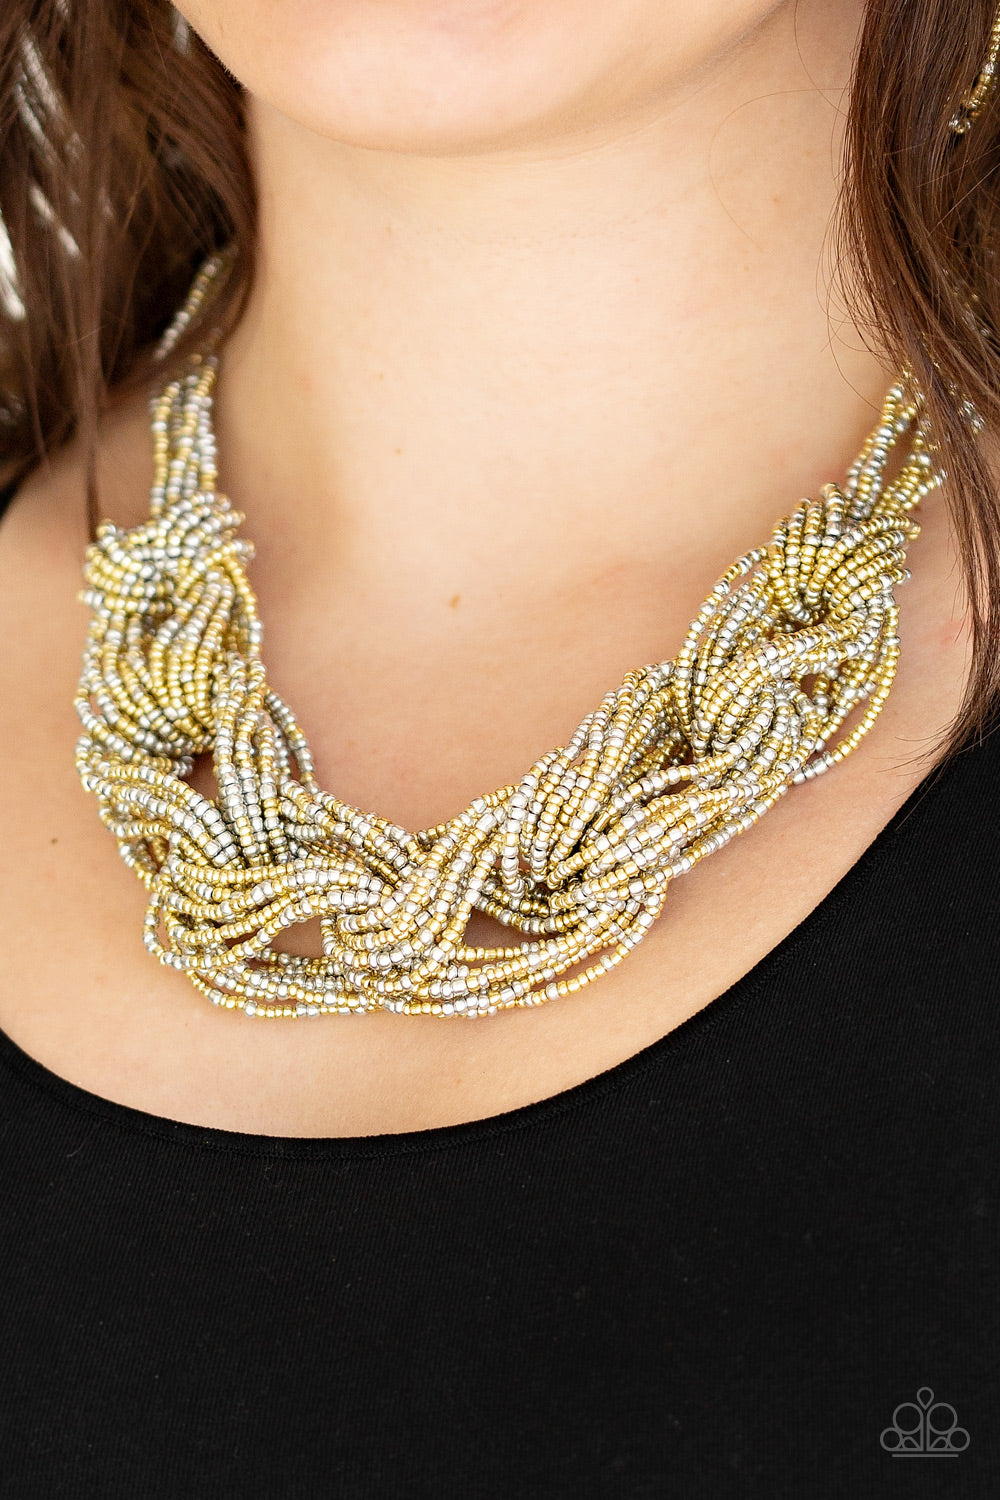 Paparazzi Jewelry & Accessories - City Catwalk - Gold Necklace. Bling By Titia Boutique